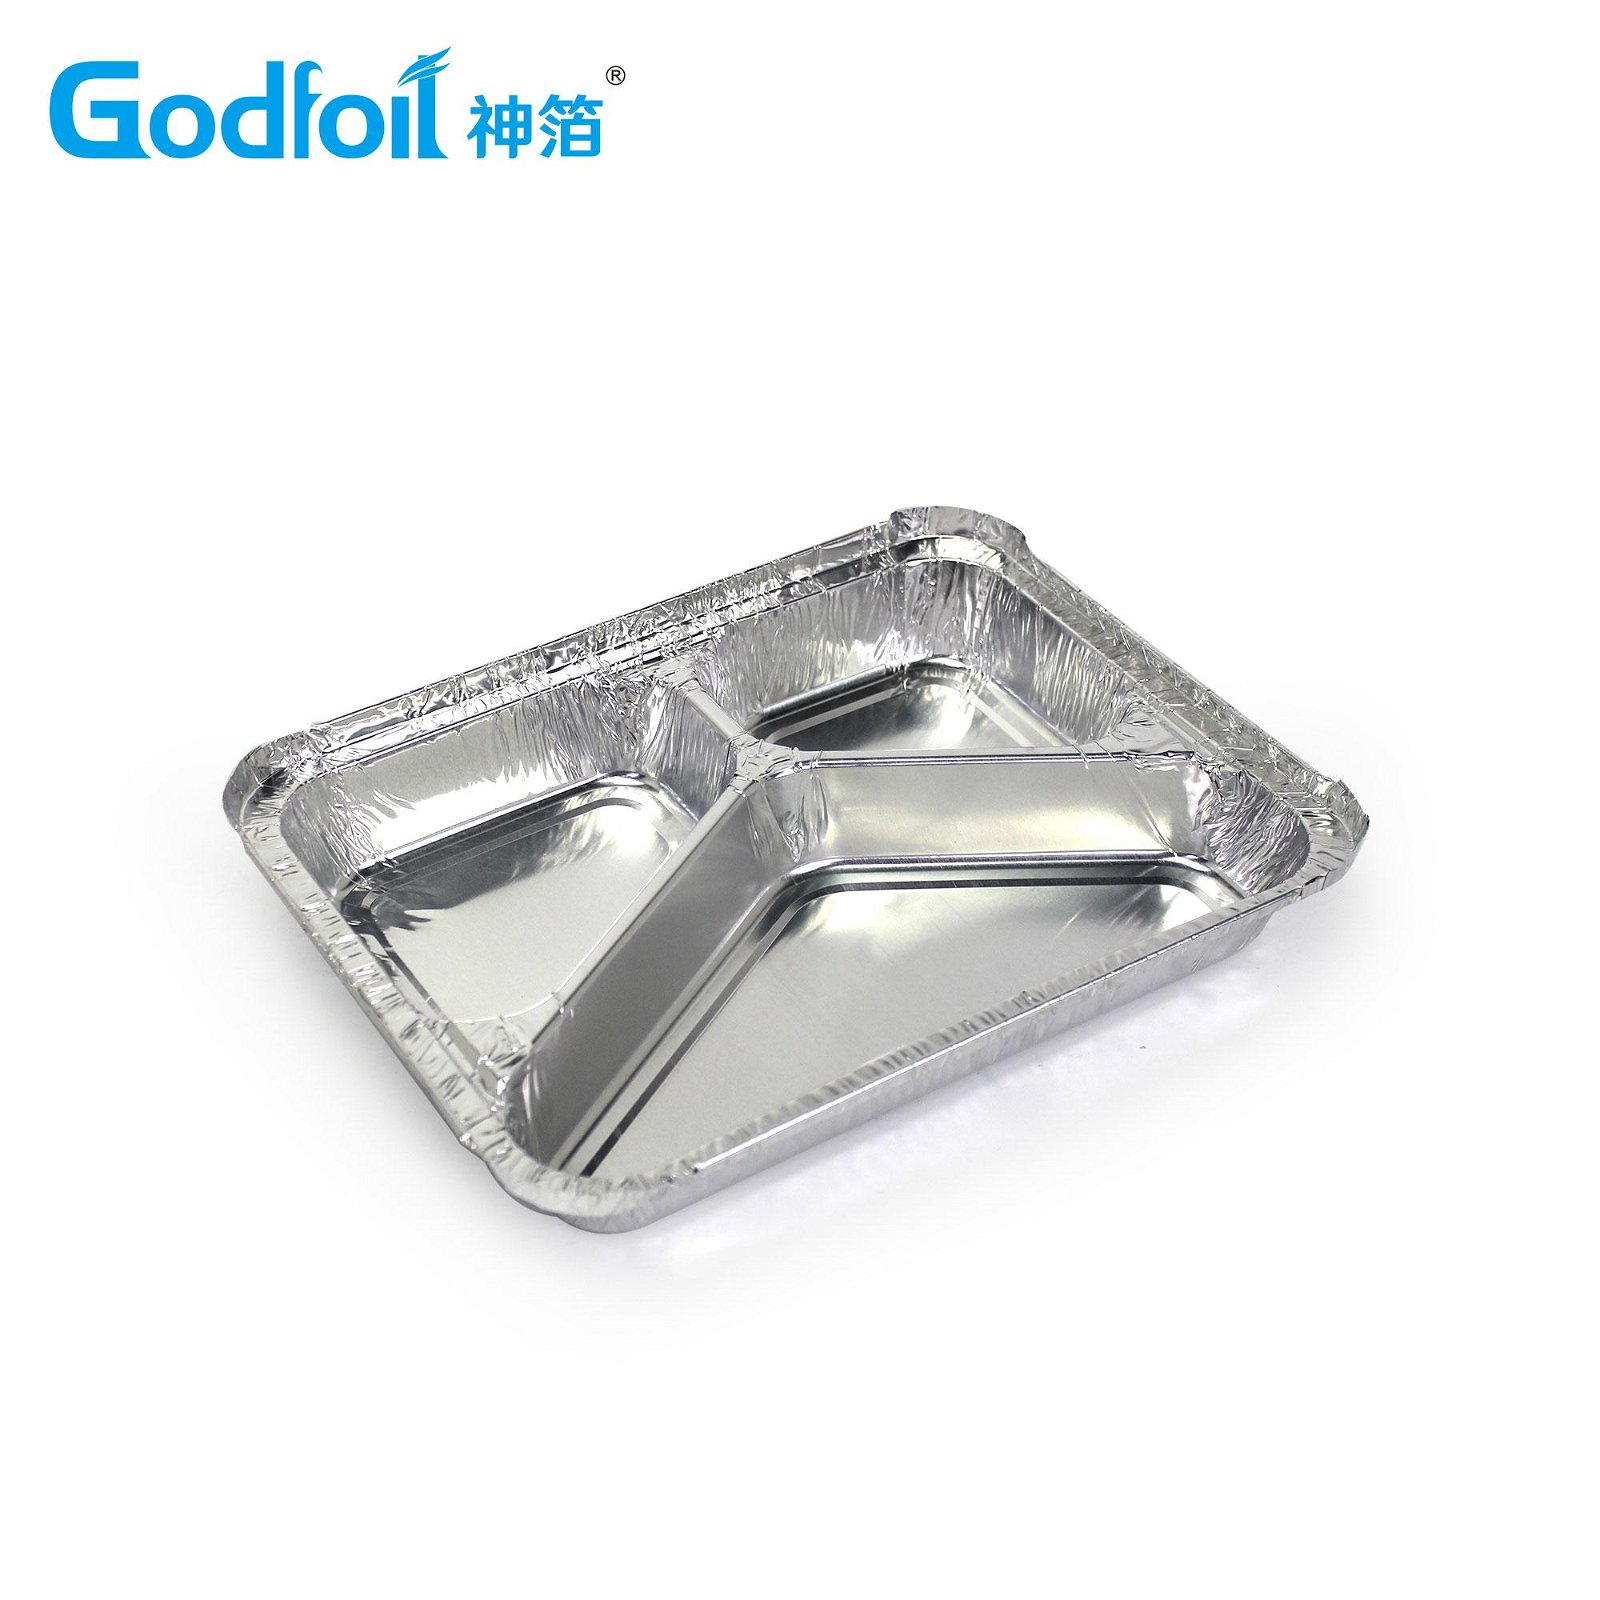 T-three compartment container mould